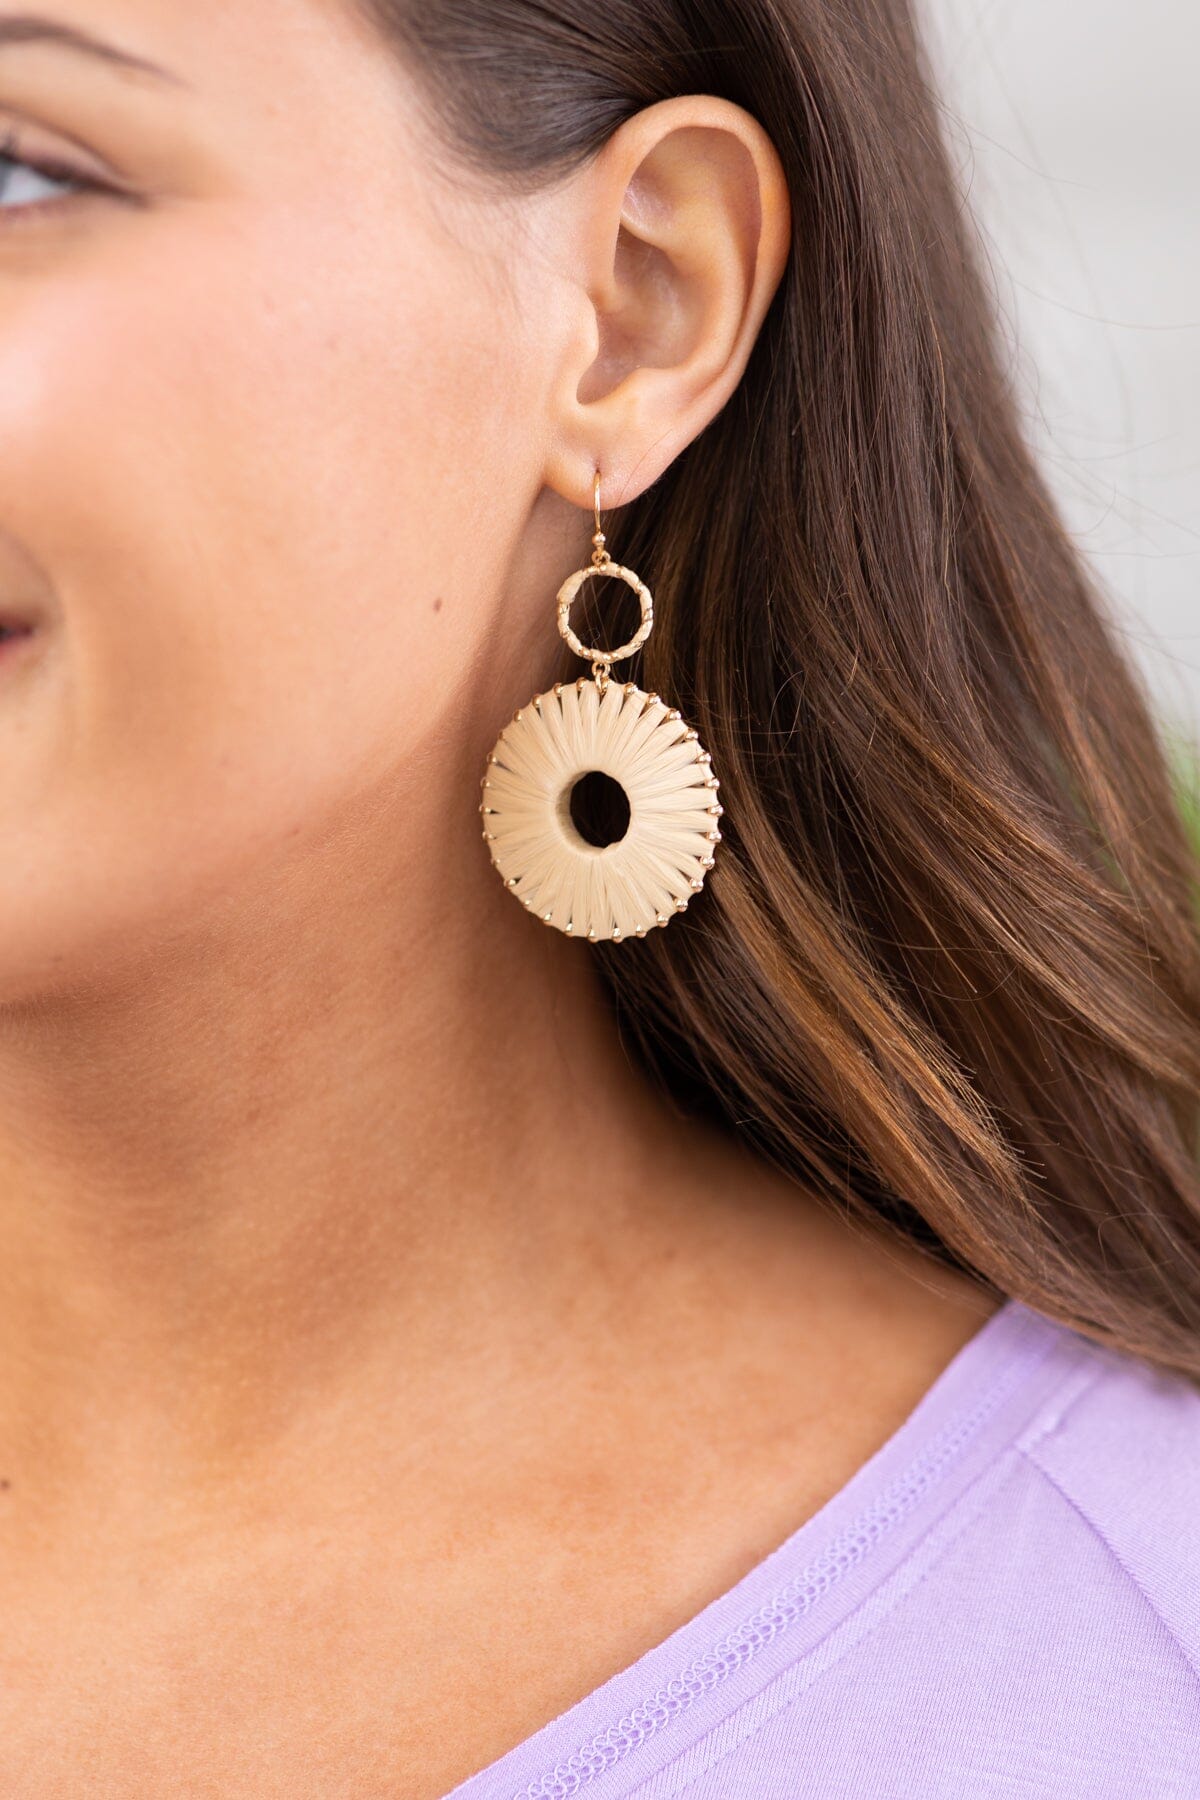 Beige Wrapped Raffia Round Earrings - Filly Flair